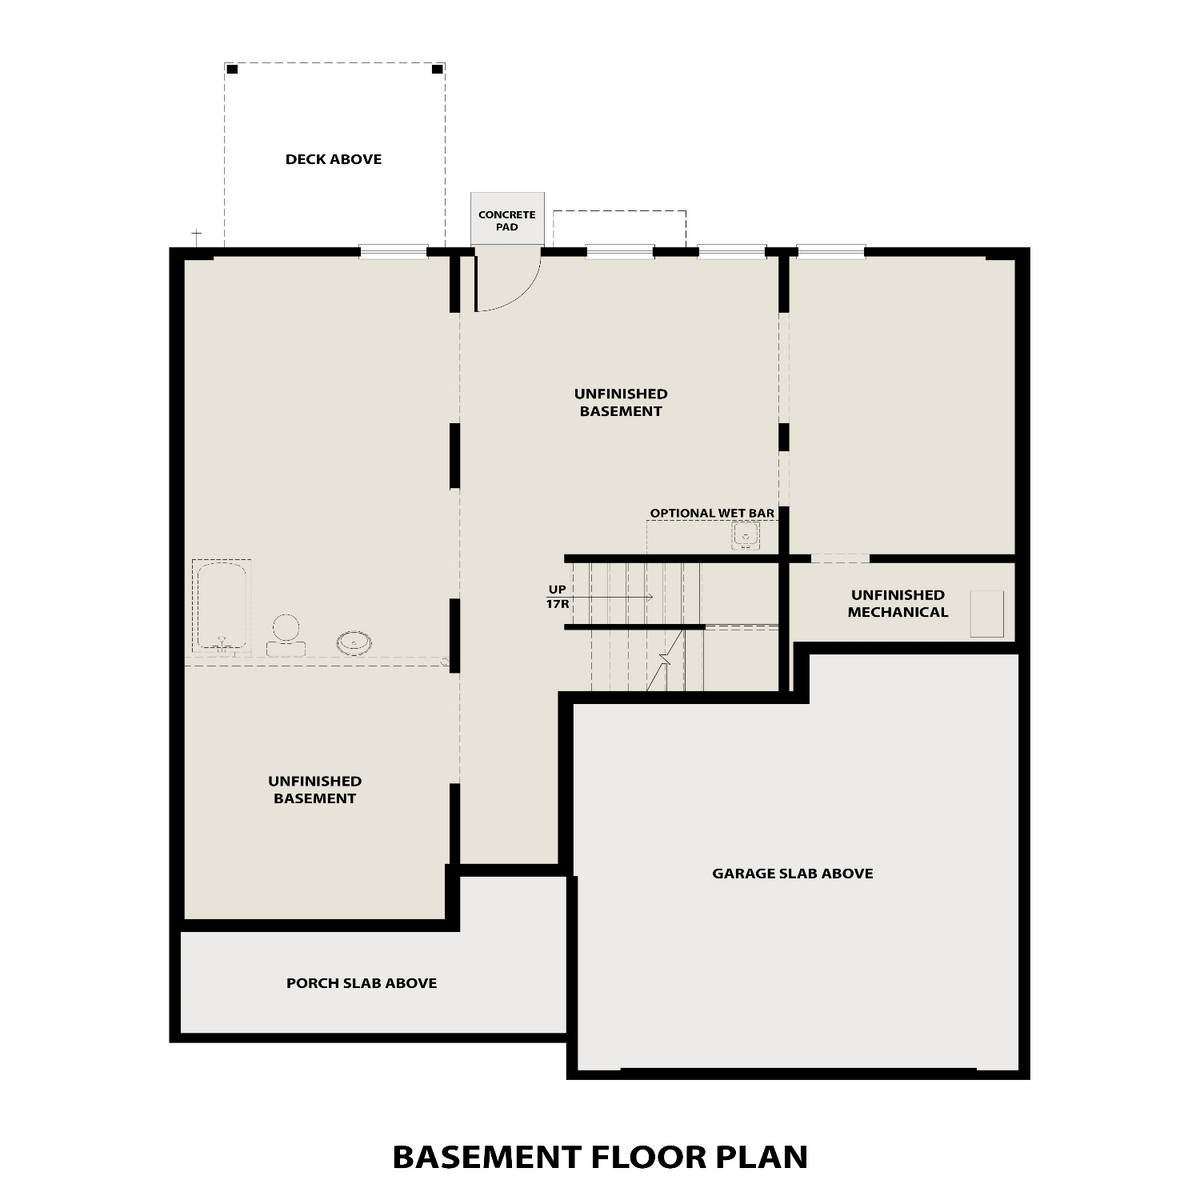 3 - The Willow B- Unfinished Basement floor plan layout for 155 Riverwood Pass in Davidson Homes' Riverwood community.